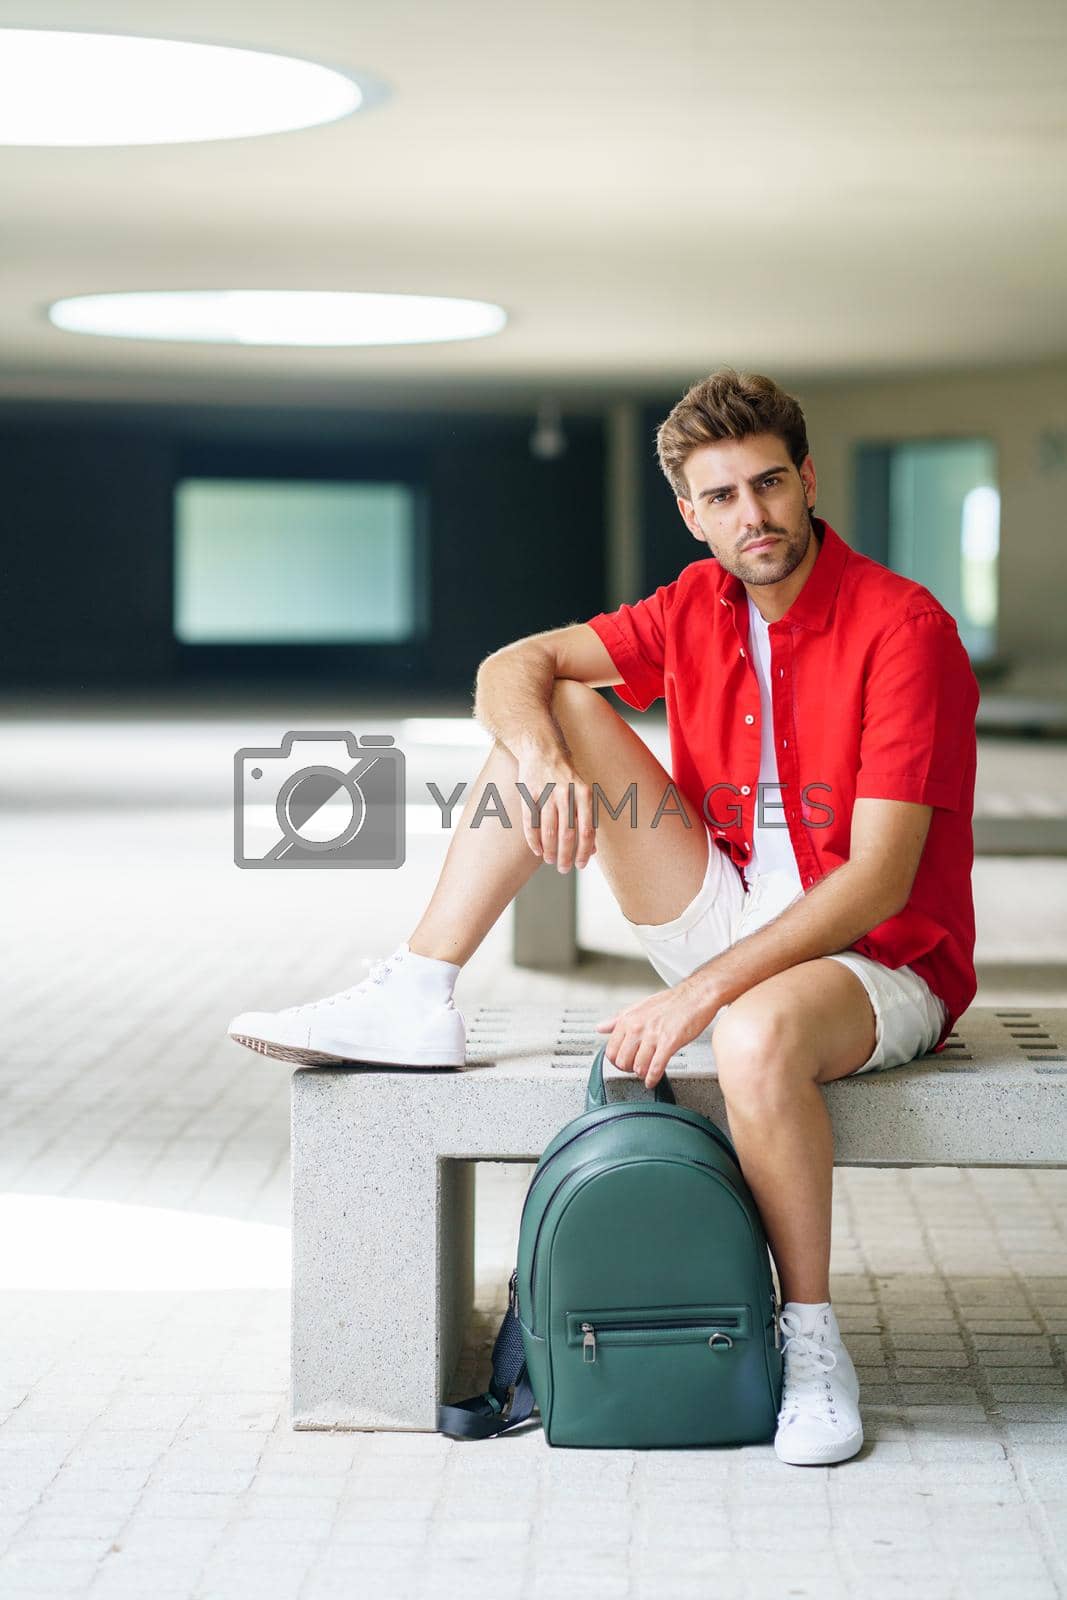 Royalty free image of Male student sitting on a college campus bench by javiindy